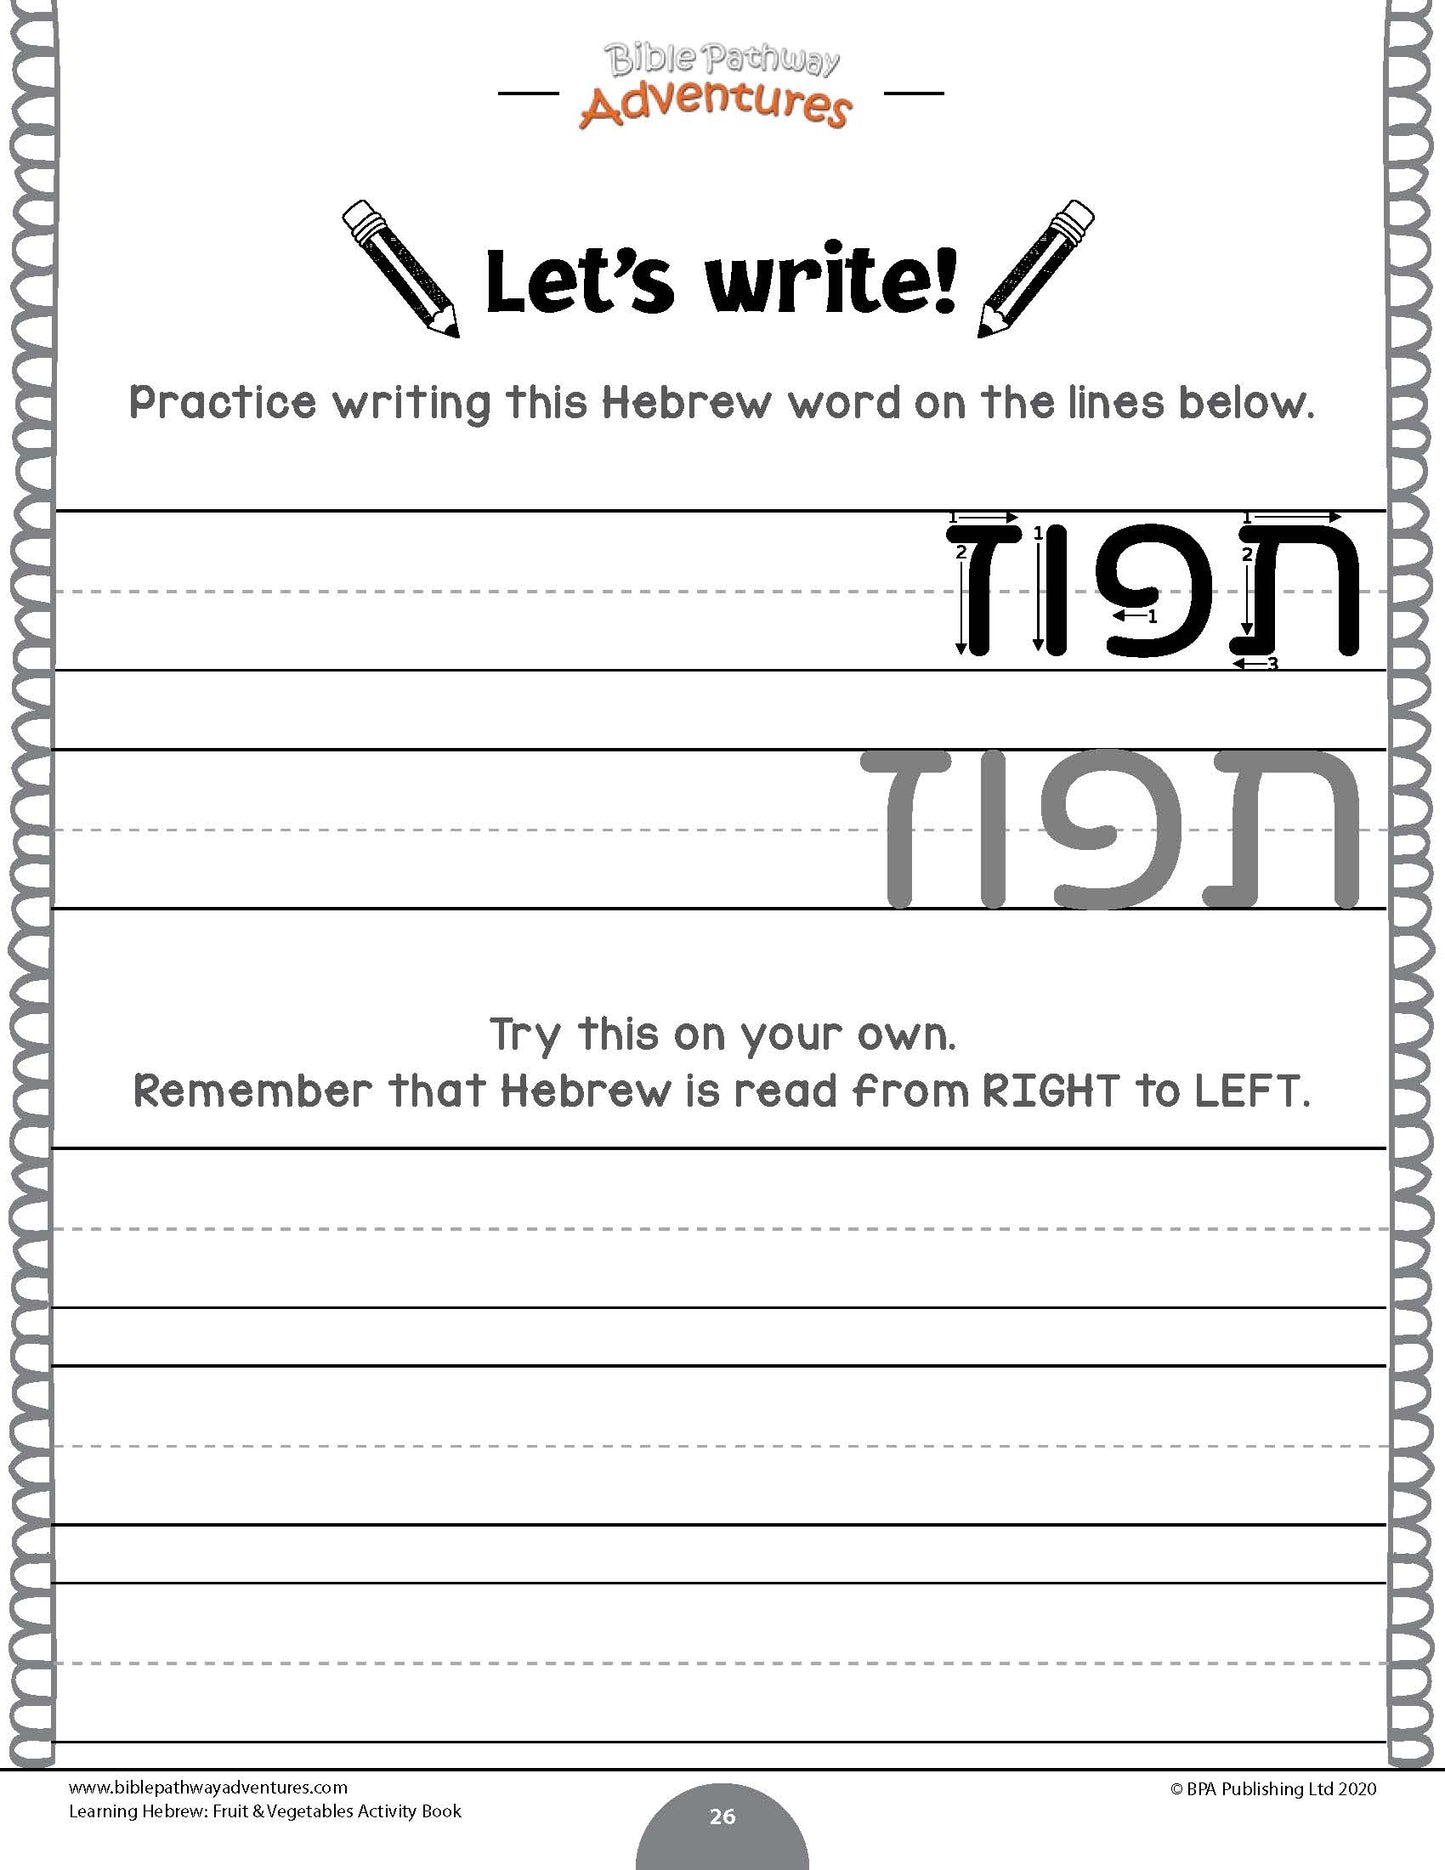 Learning Hebrew: Fruit & Vegetables Activity Book for Beginners (PDF)